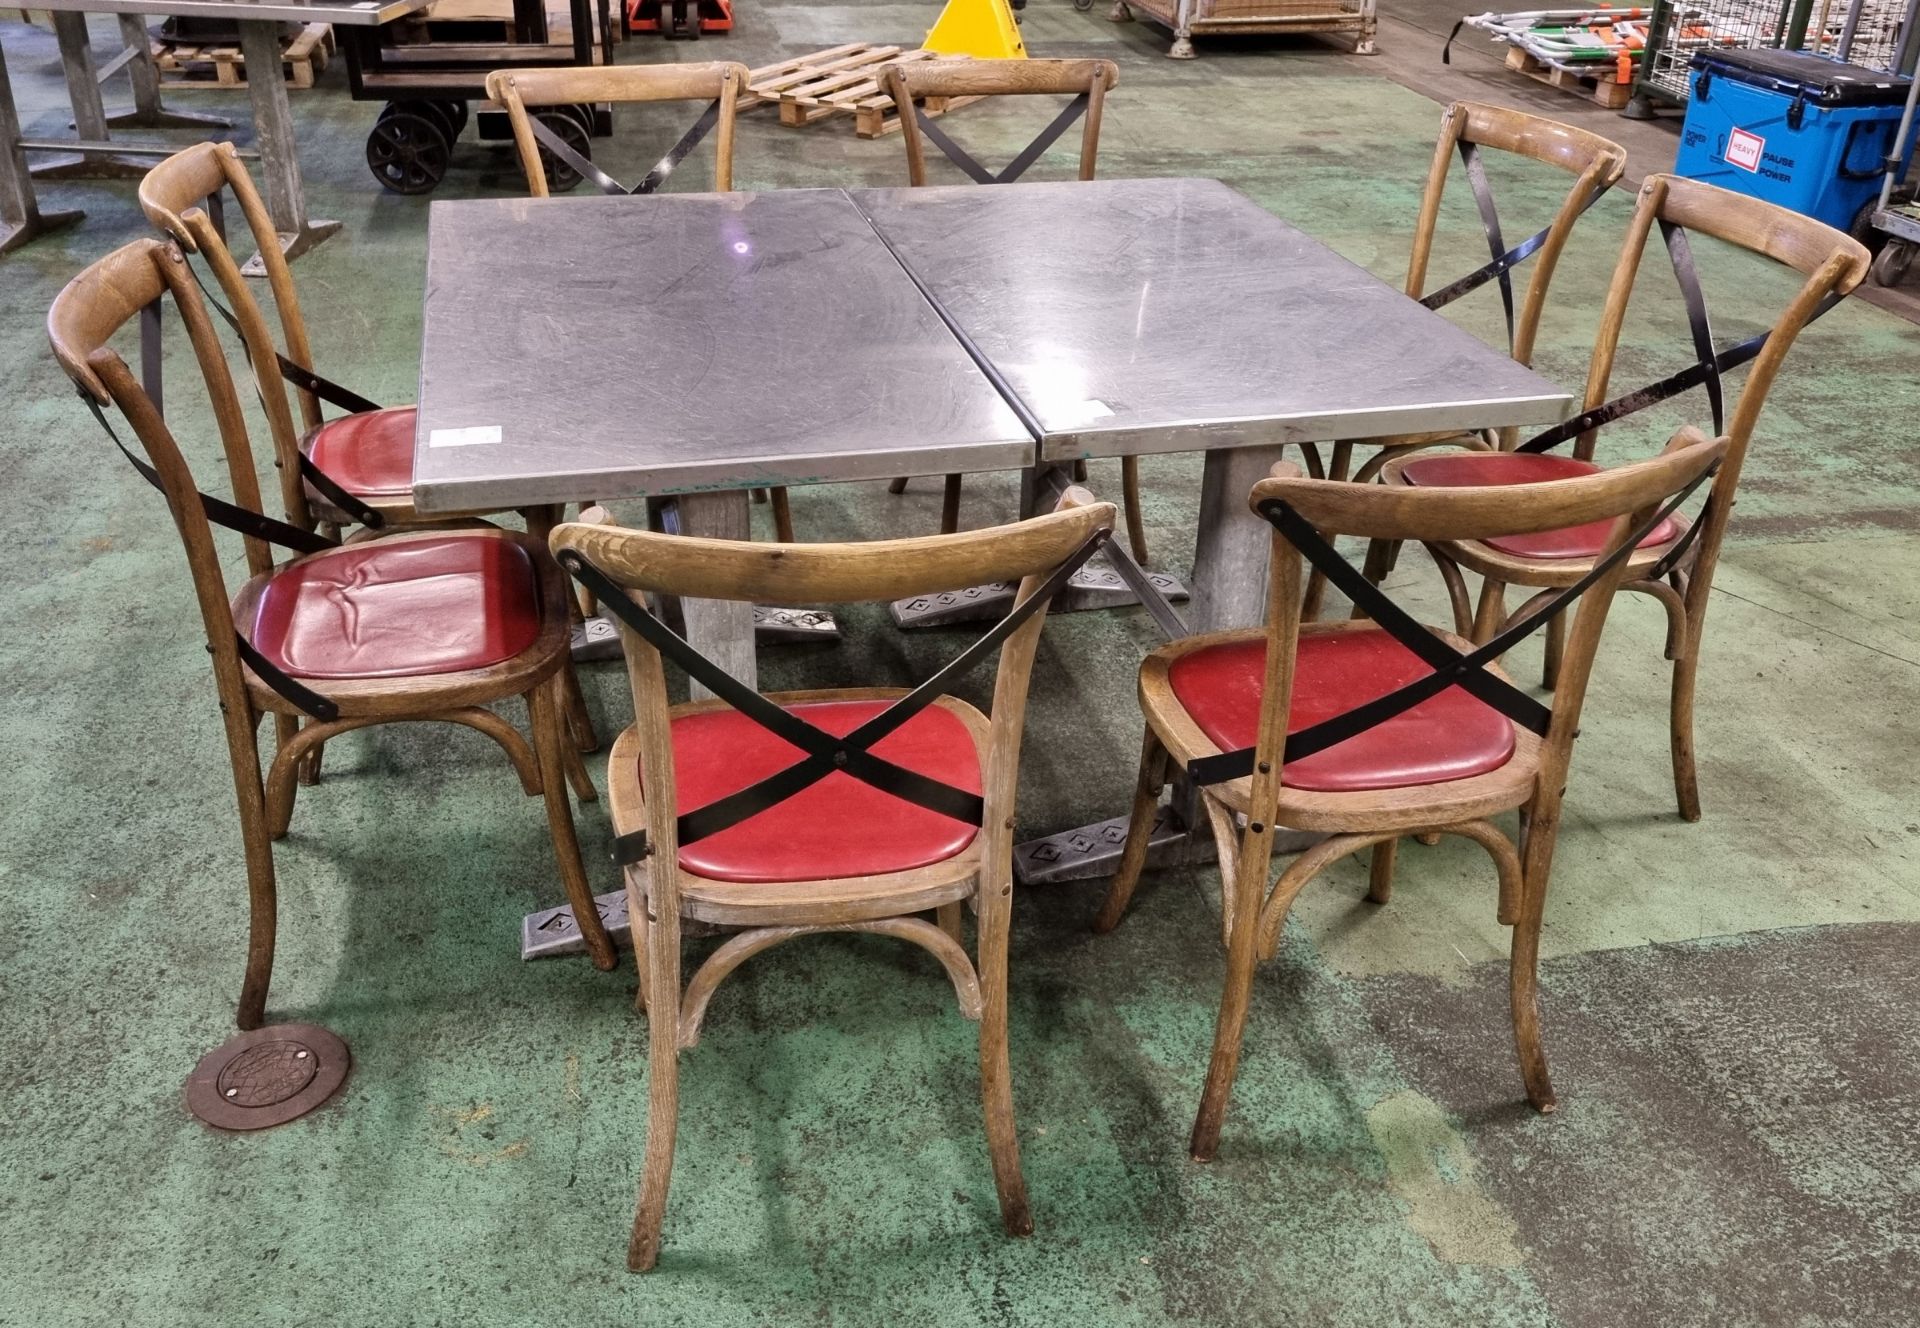 8x Wooden restaurant chairs, 2x Metal tables - W 1200 x D 690 x H 760 mm - Image 3 of 5